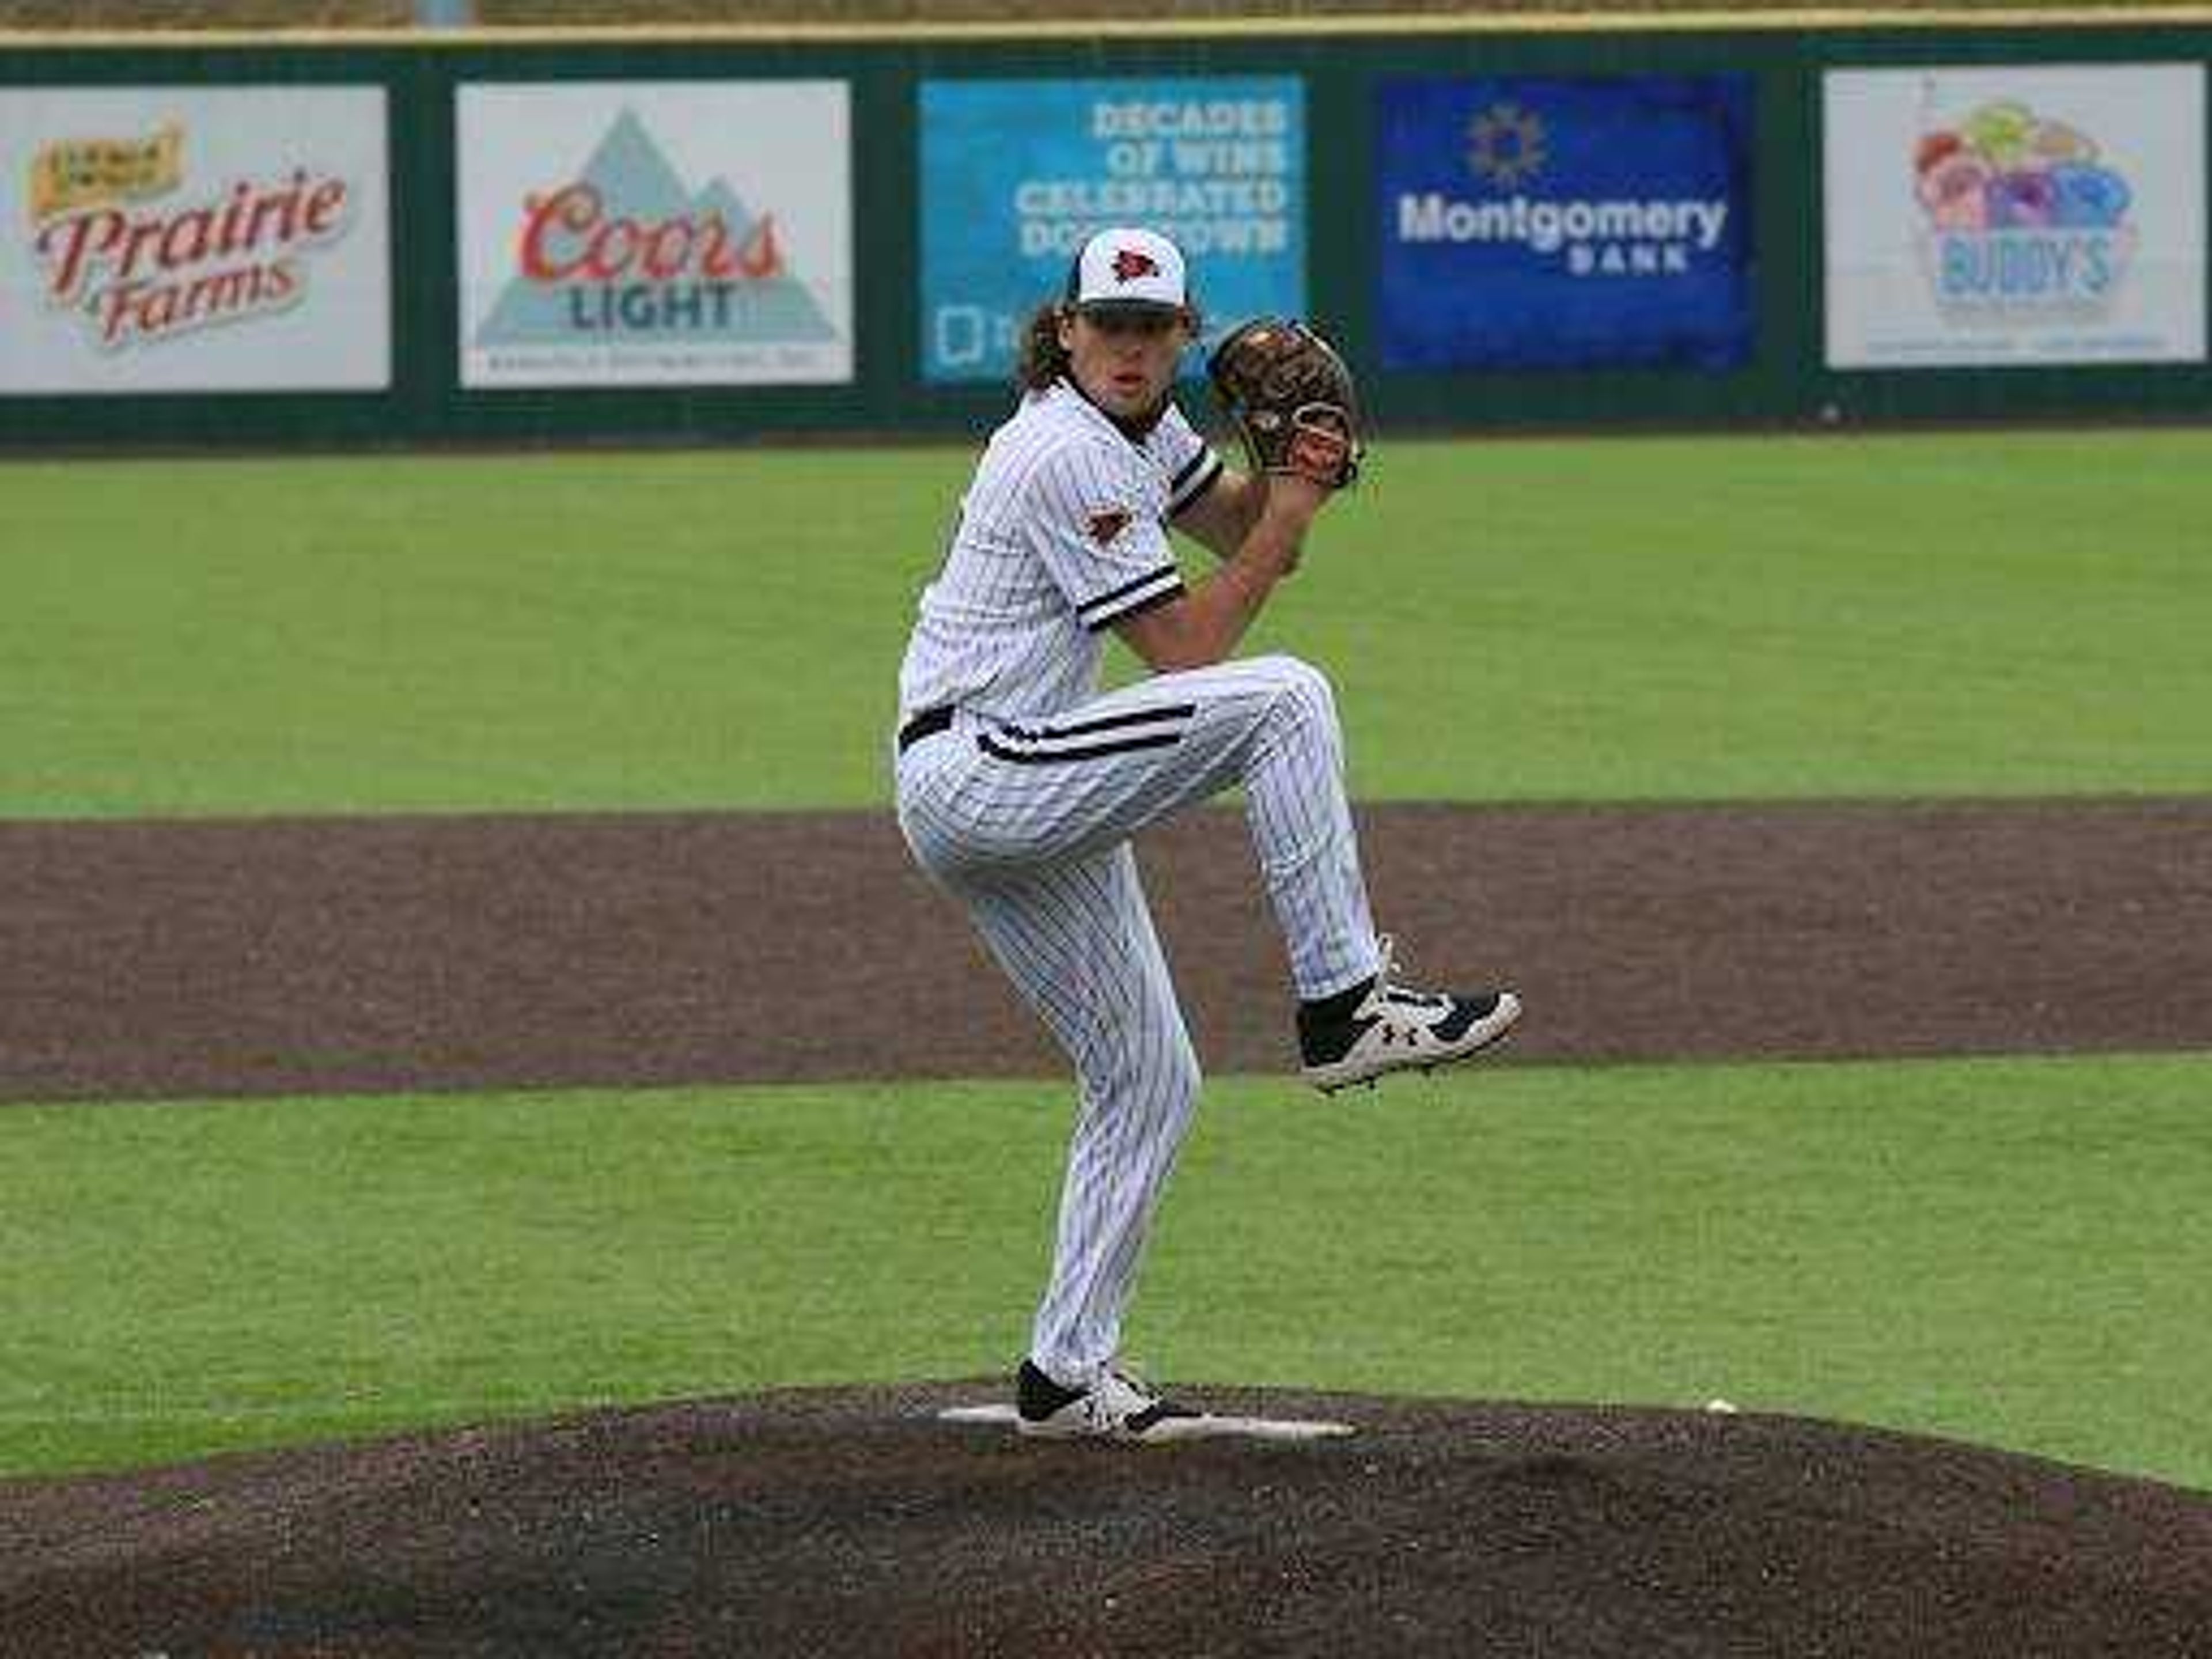 Dylan Dodd delivers a pitch during a game at Capaha Park in Cape Girardeau.